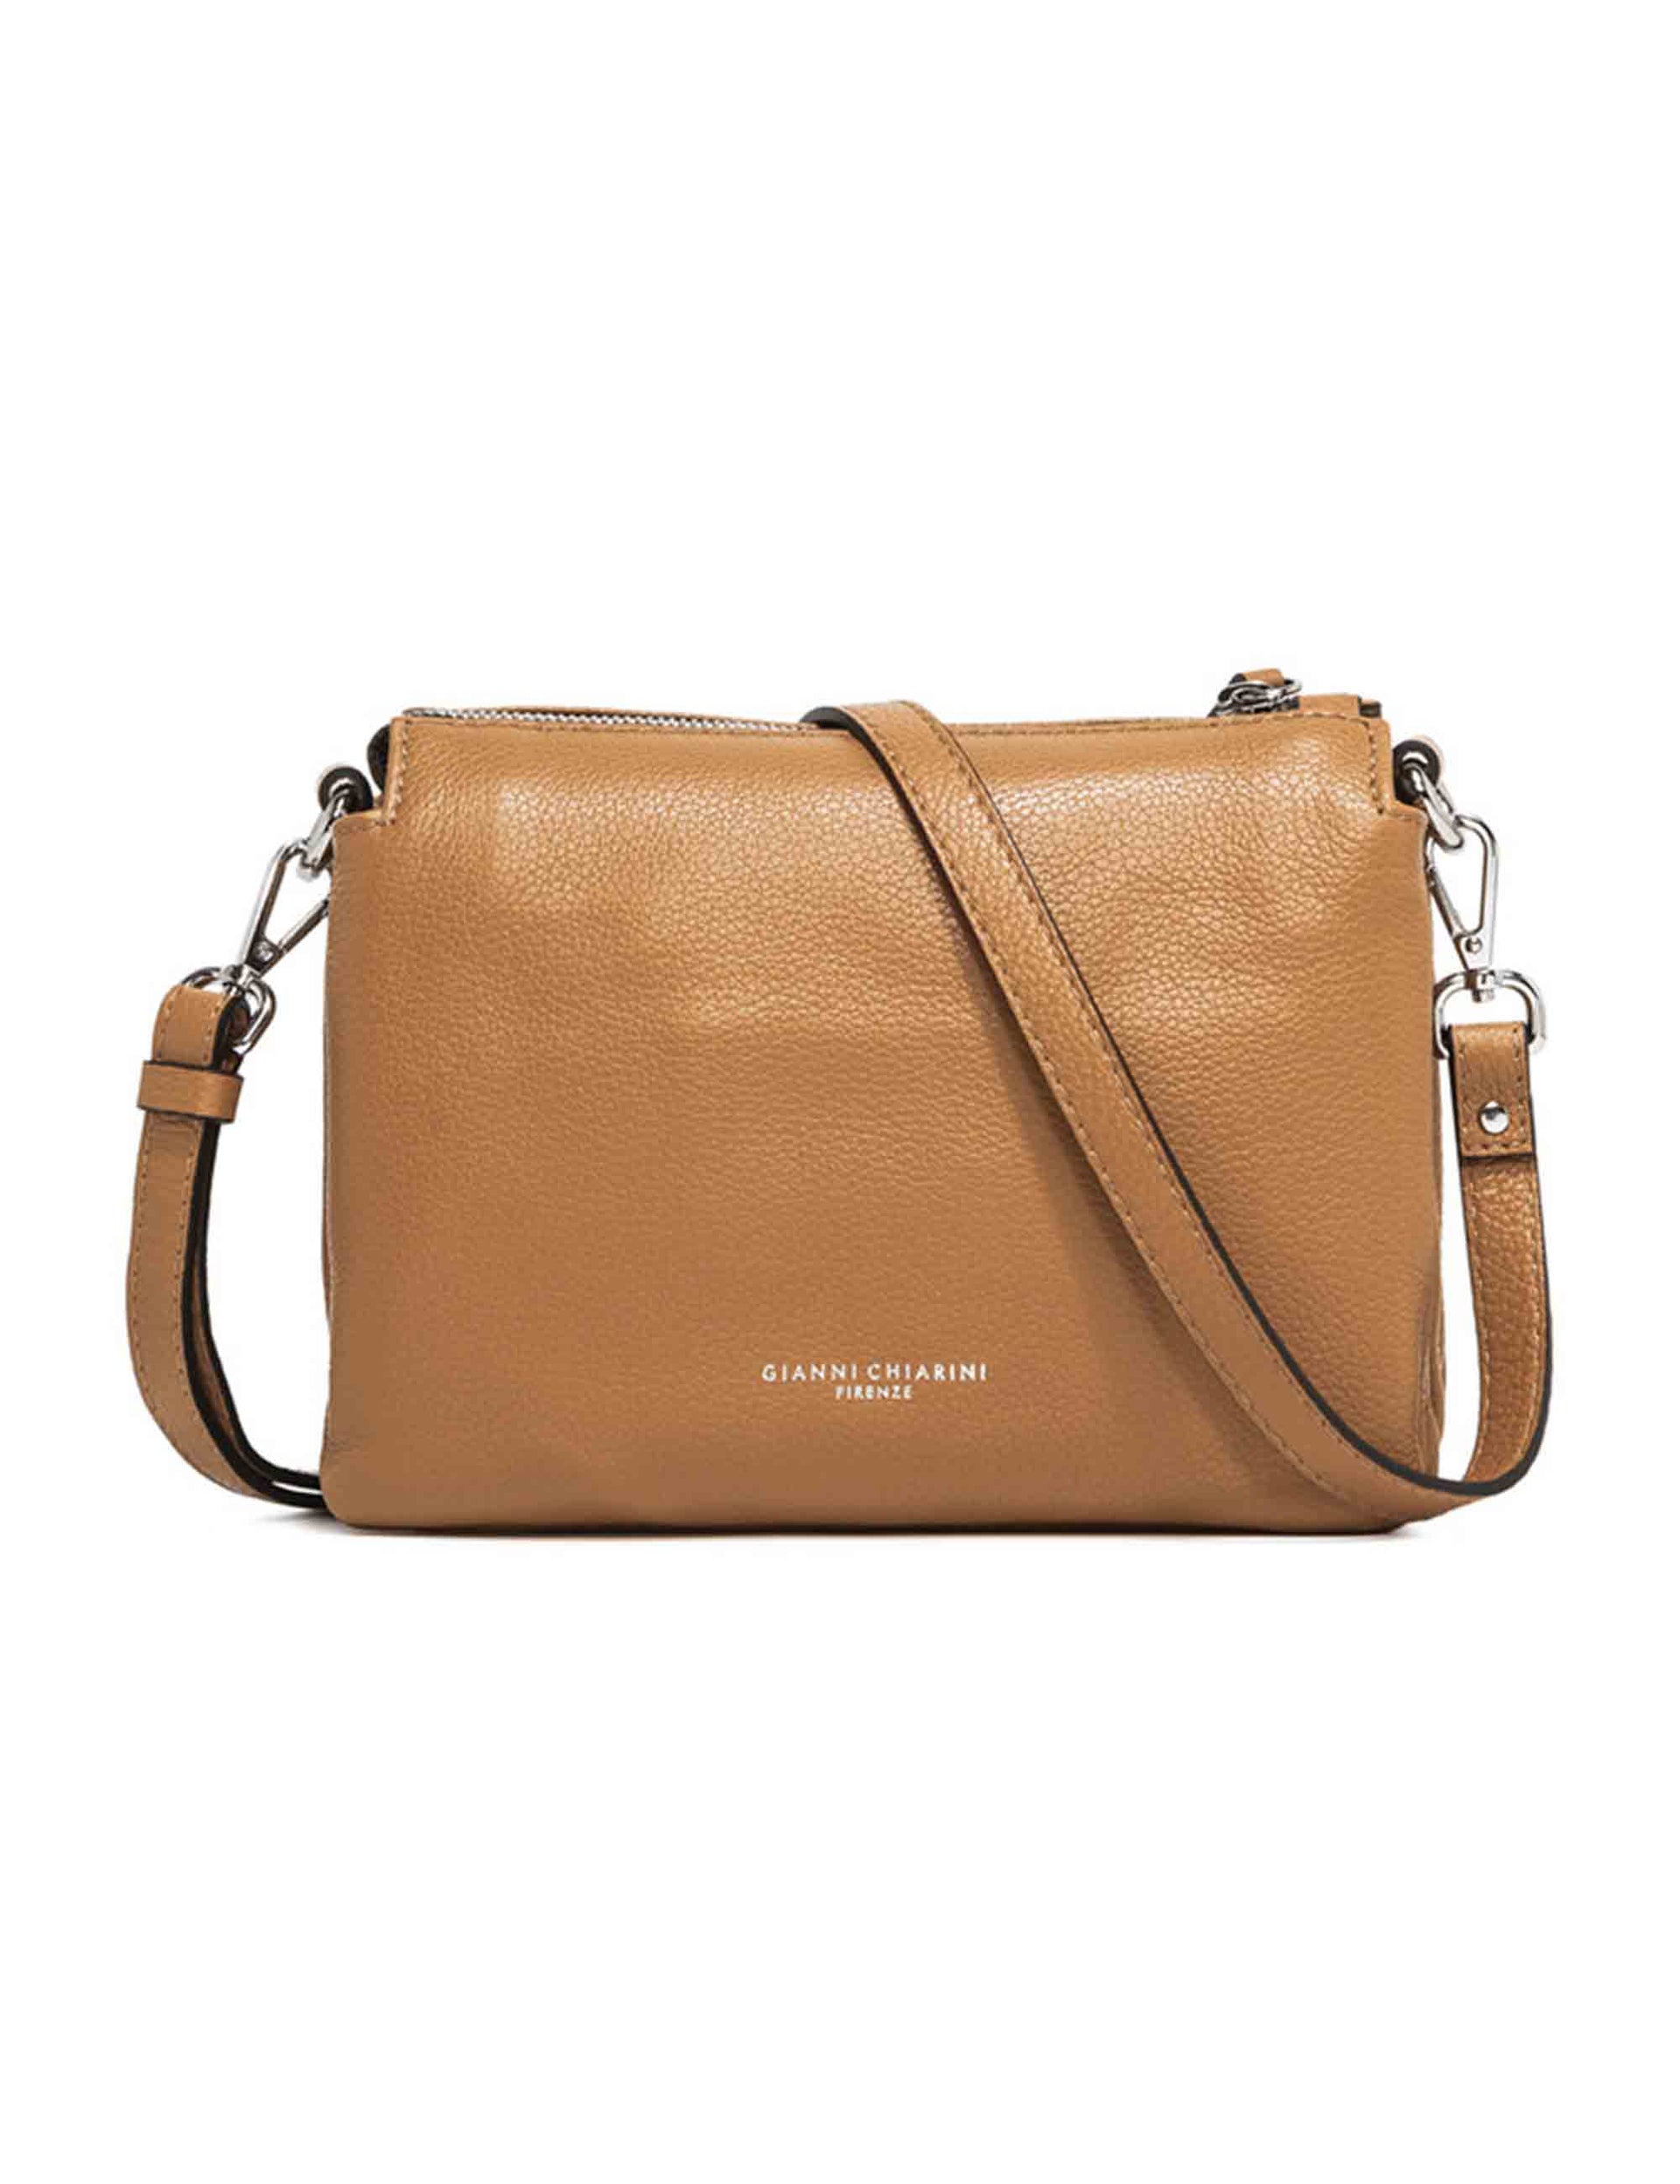 Three women's clutch bags in natural leather with matching removable shoulder strap